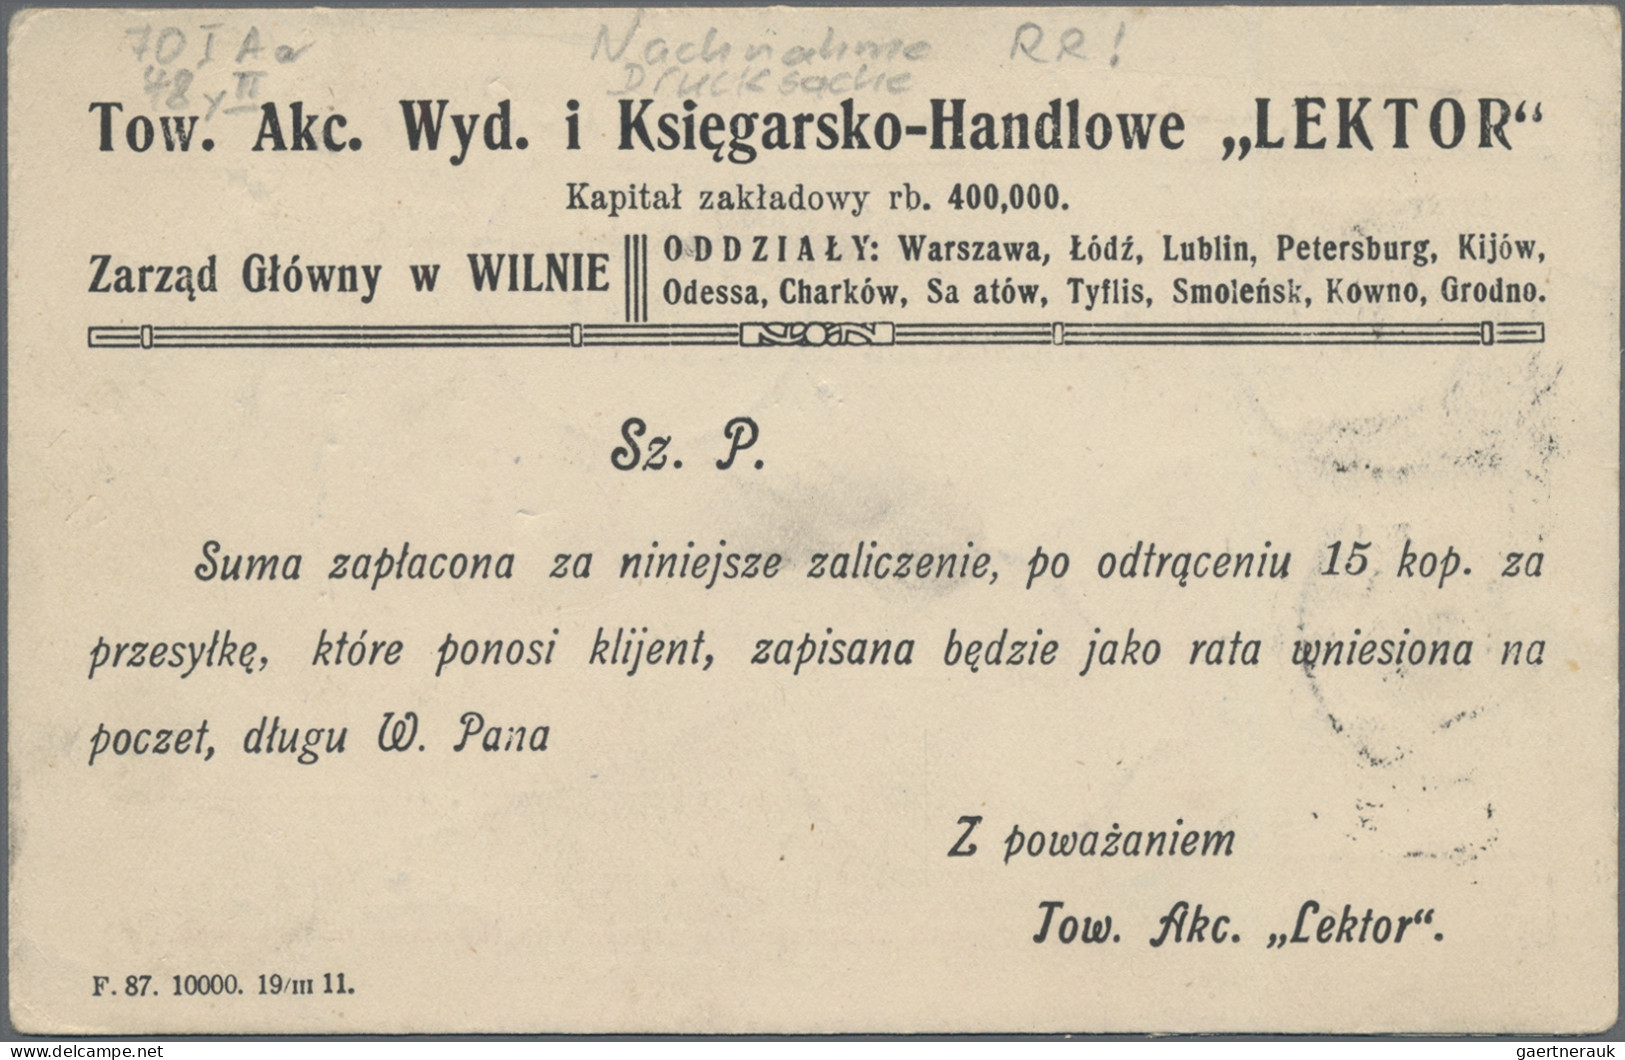 Russia: 1911 Registered C.O.D. Card From Vilna To Gorolyshe, Kiev Franked 1908 5 - Lettres & Documents